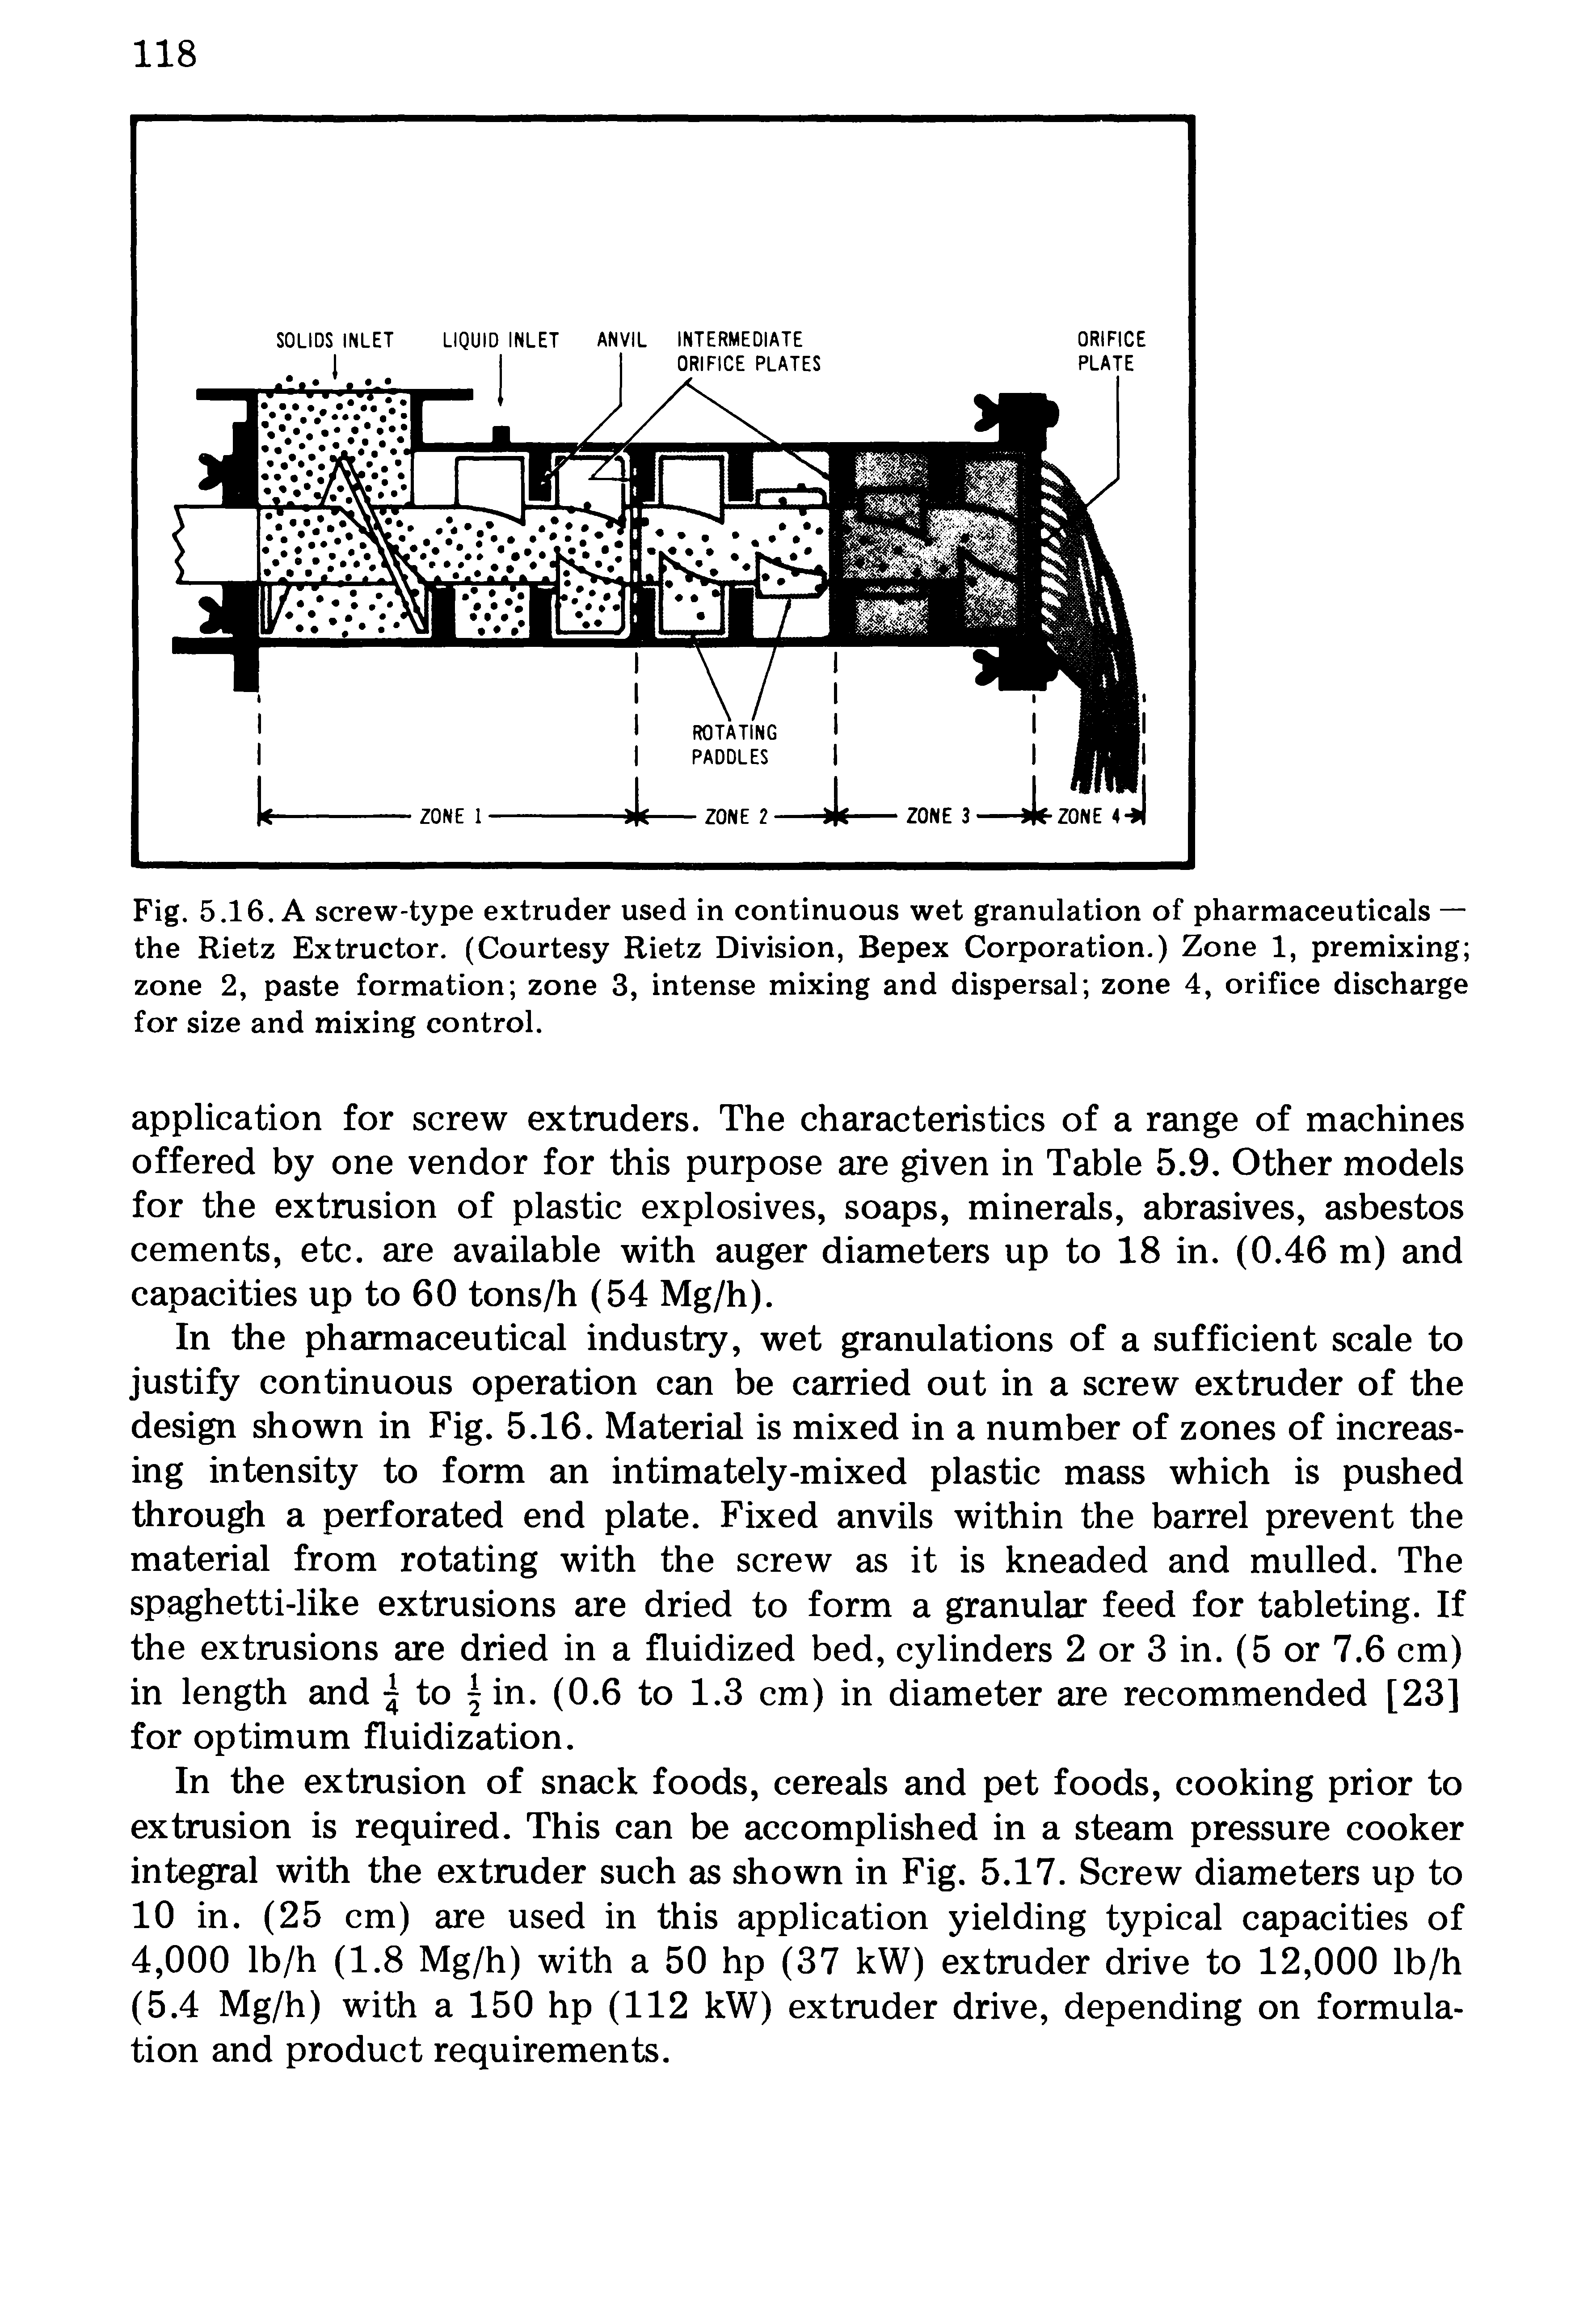 Fig. 5.16. A screw-type extruder used in continuous wet granulation of pharmaceuticals — the Rietz Extructor. (Courtesy Rietz Division, Bepex Corporation.) Zone 1, premixing zone 2, paste formation zone 3, intense mixing and dispersal zone 4, orifice discharge for size and mixing control.